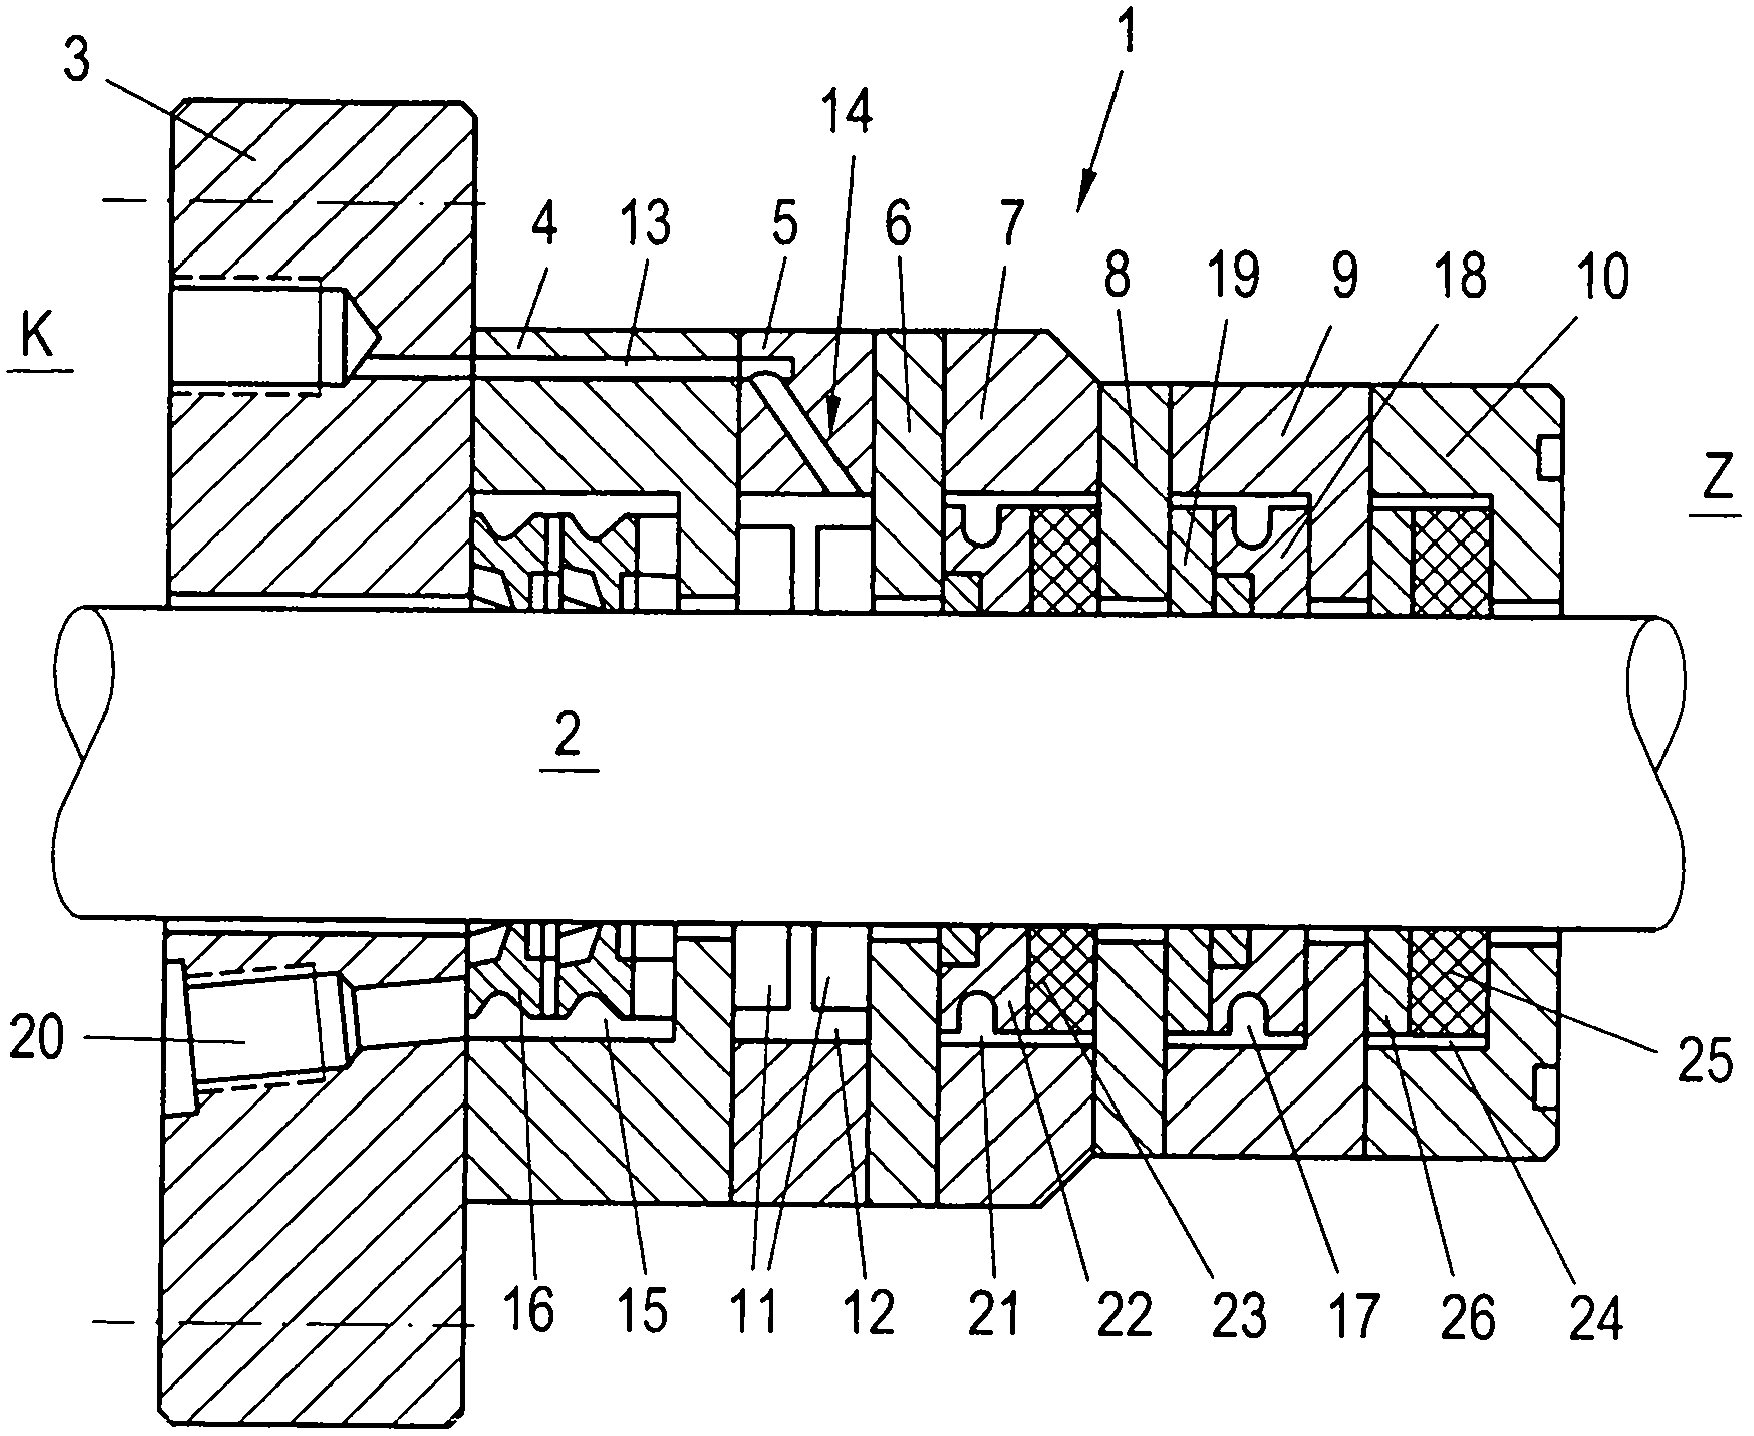 Sealing system for reciprocating piston rod of reciprocating compressor